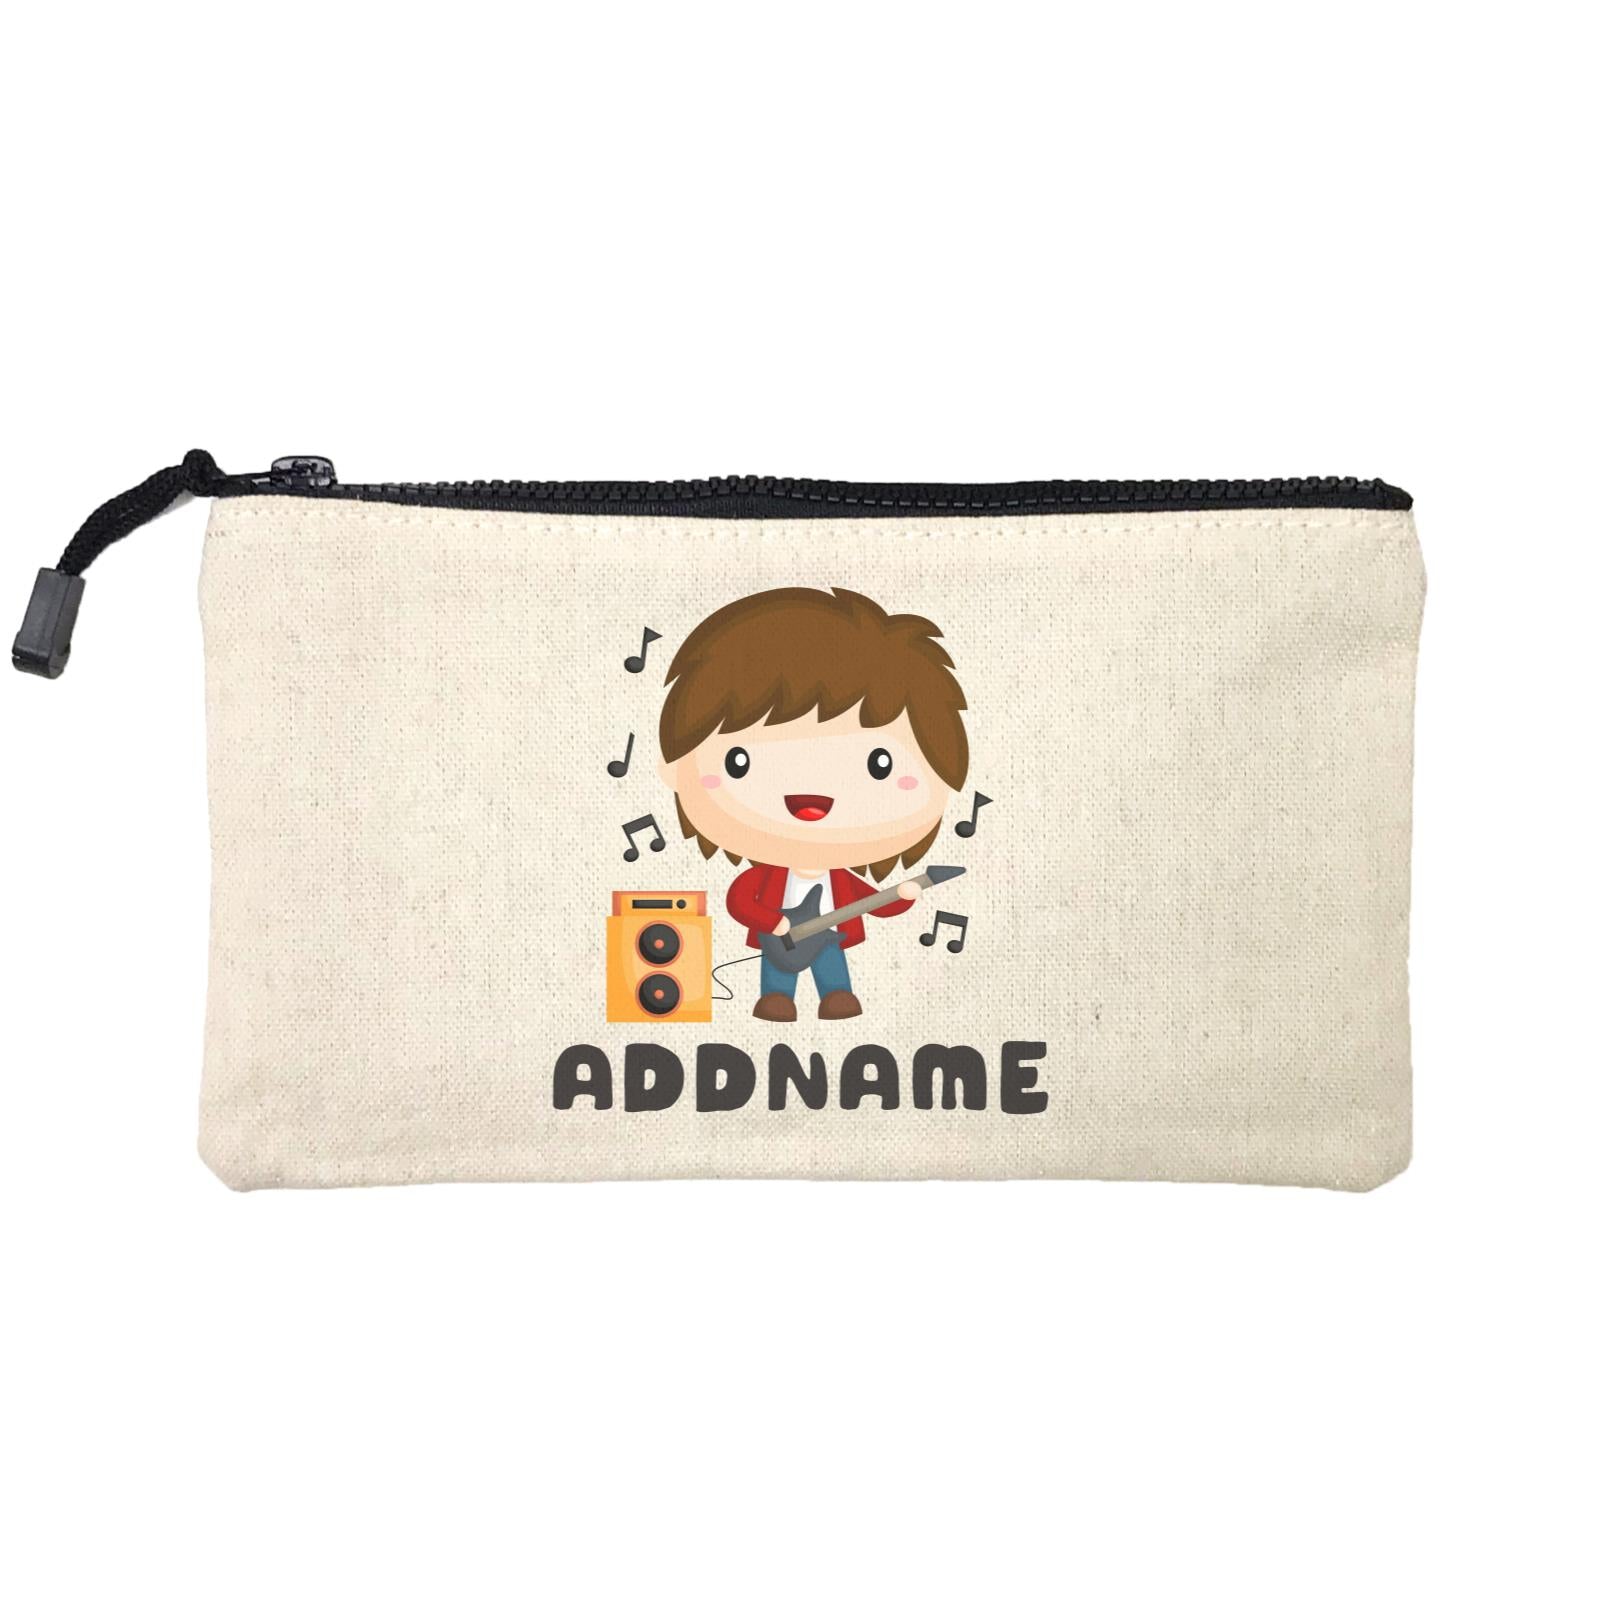 Birthday Music Band Boy Playing Bass Addname Mini Accessories Stationery Pouch